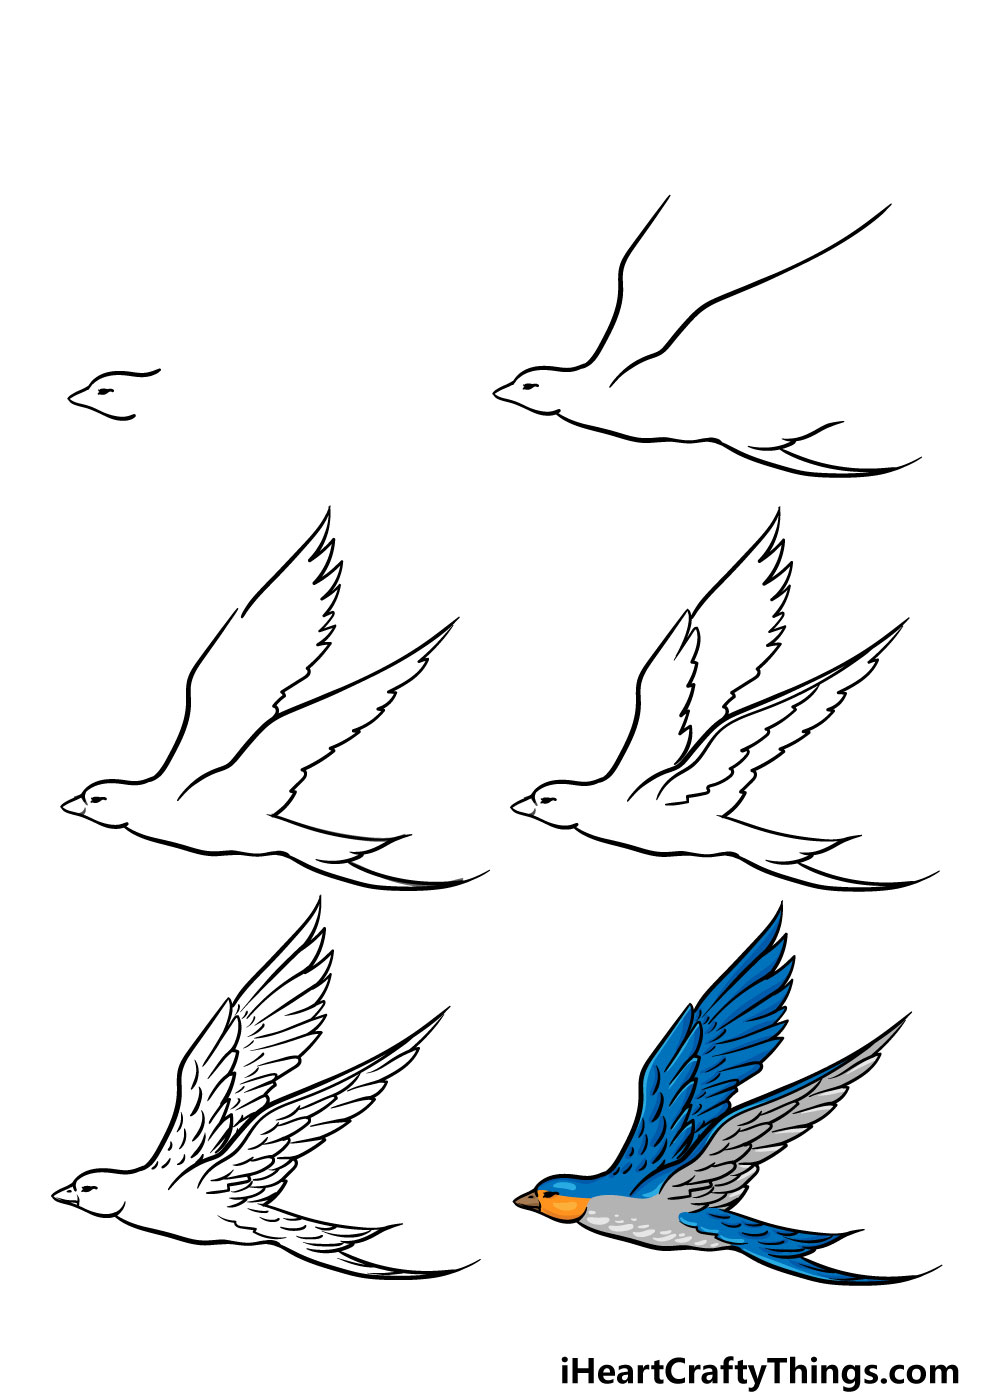 how to draw a flying bird in 6 easy steps